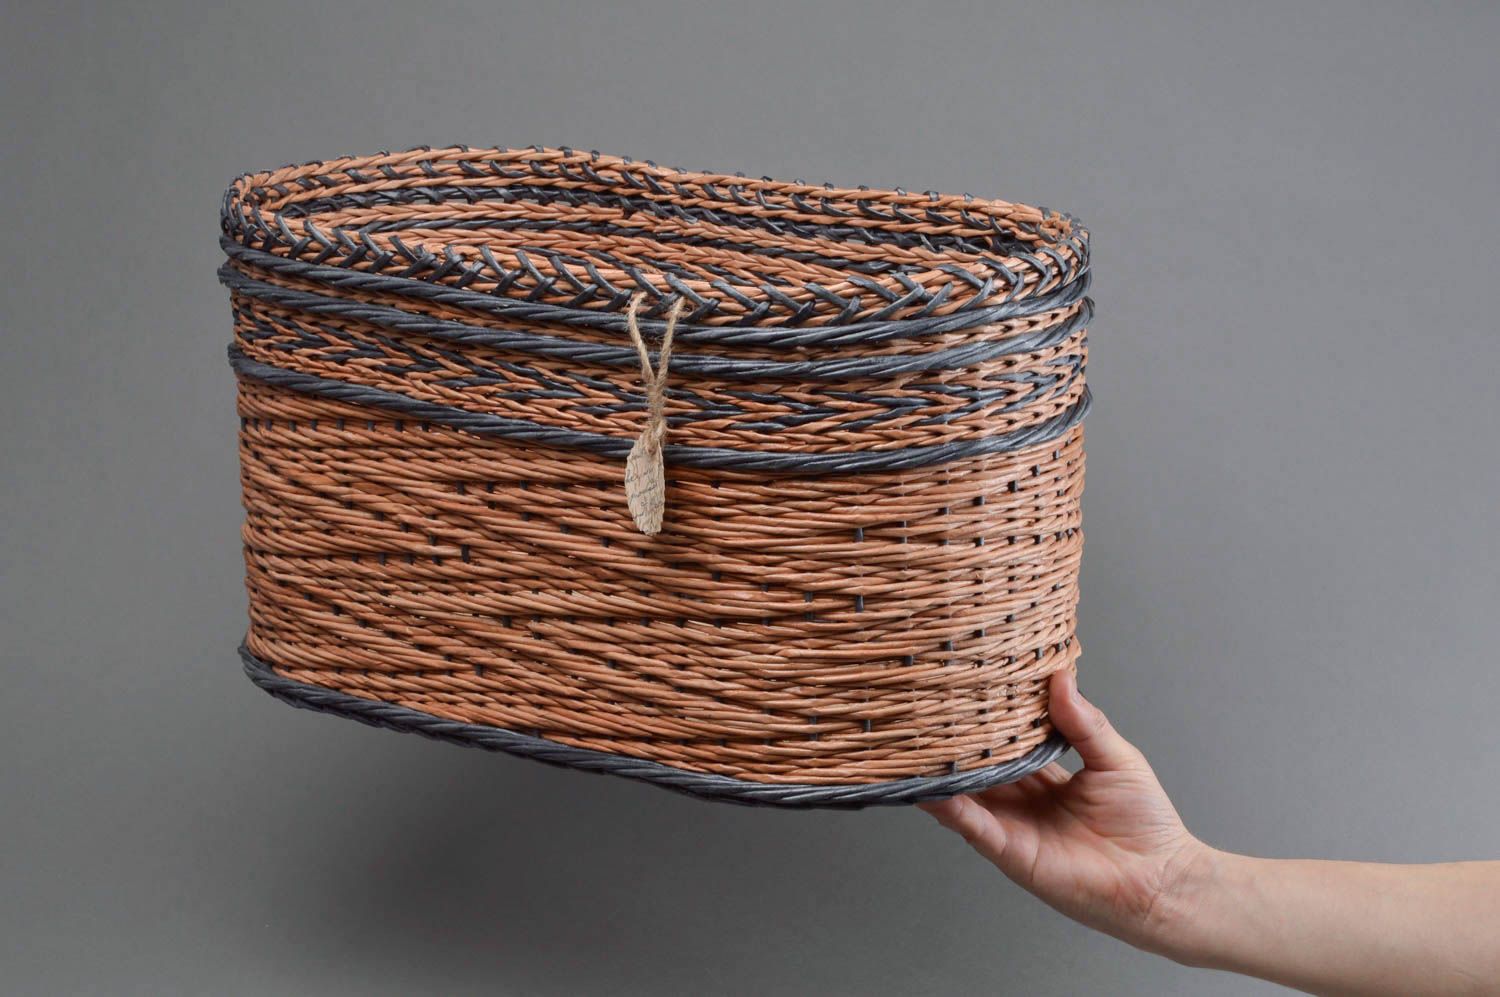 Handmade beautiful decorative basket woven of paper rod with patterned bottom photo 4